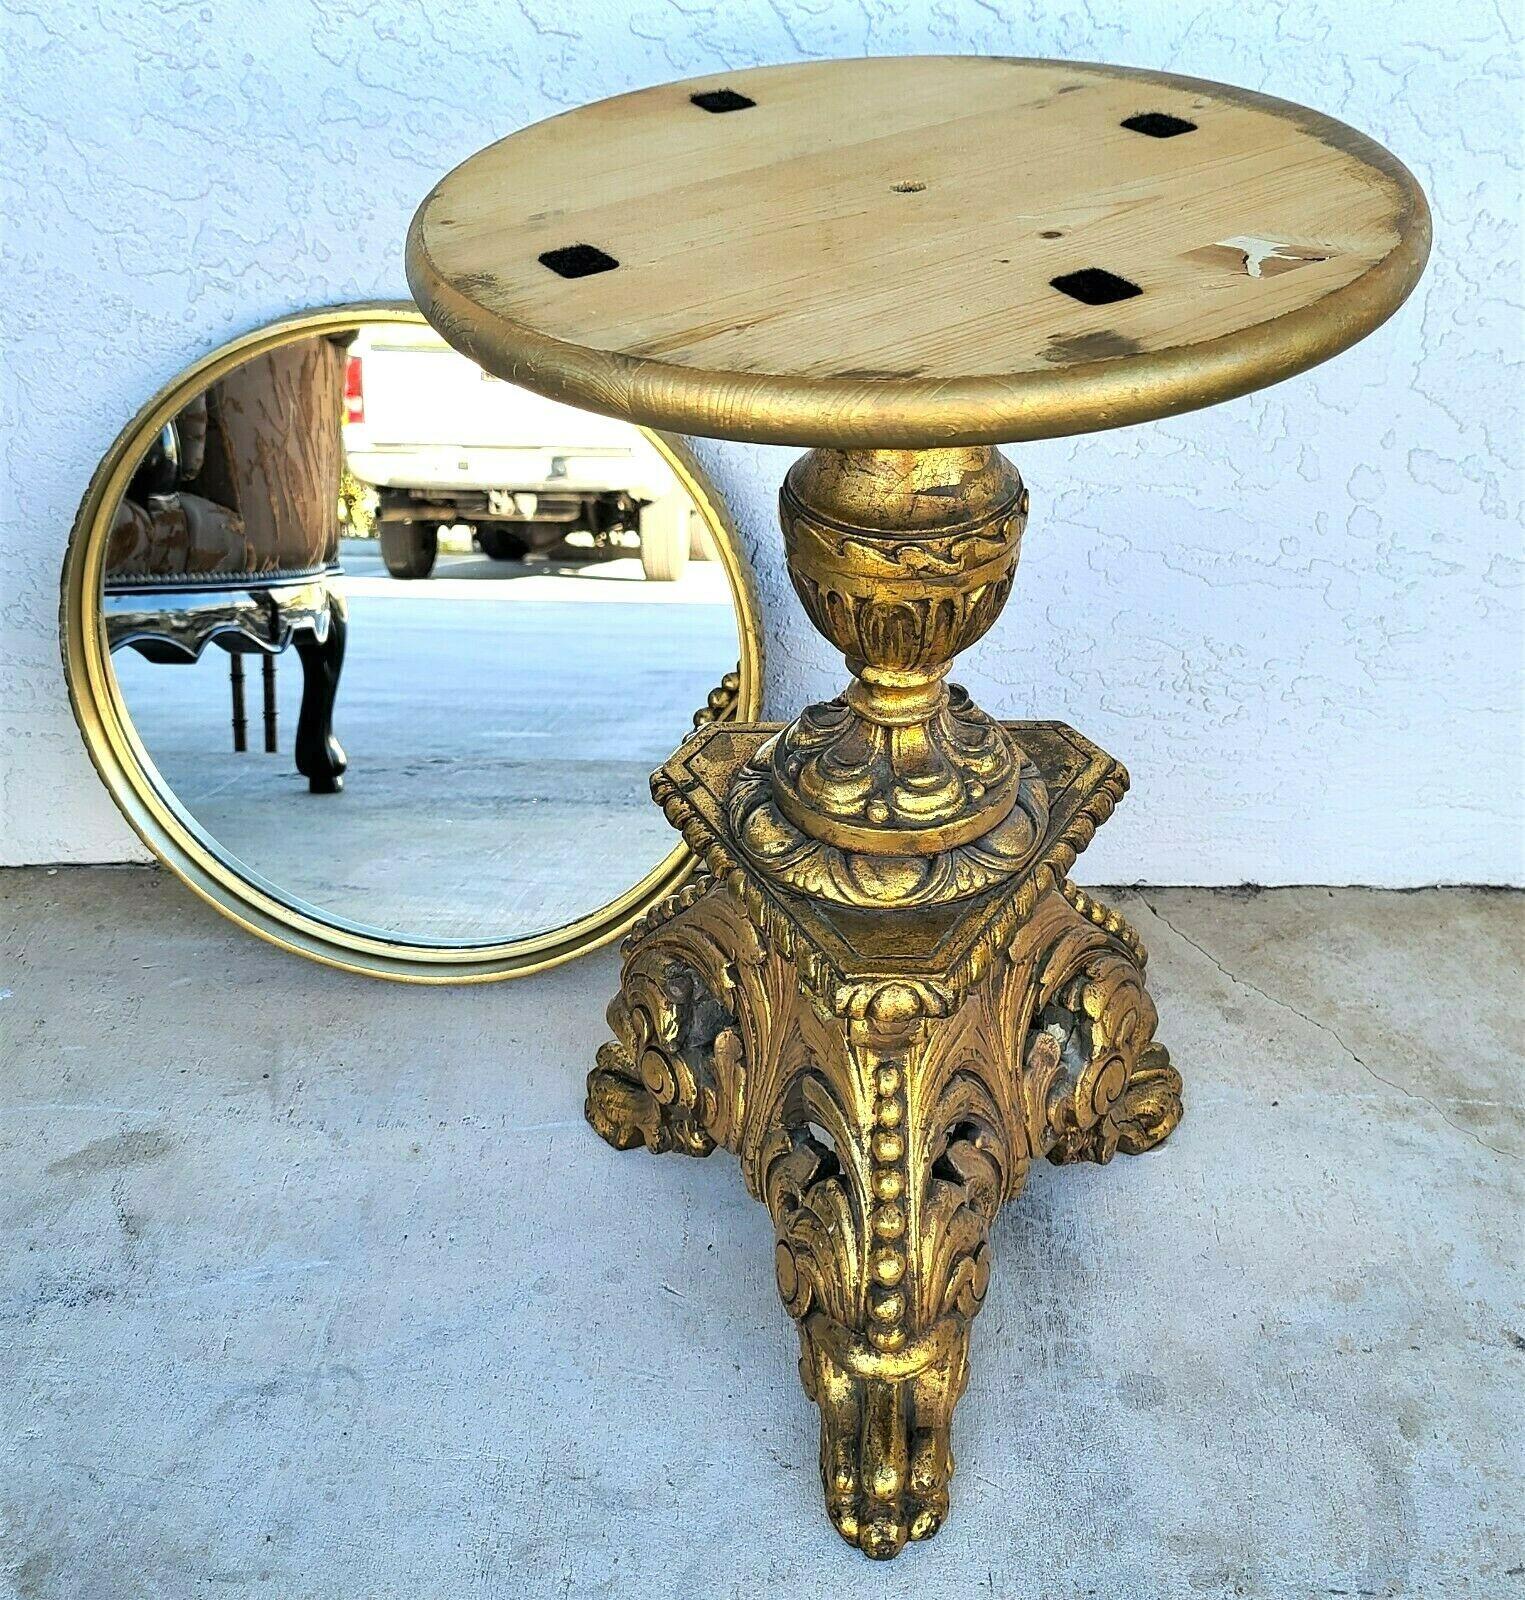 Offering one of our recent Palm Beach estate fine furniture acquisitions of an
antique rococo Louis xv brass wrapped gilt side accent table with metal mirrored serving tray
The tray is removable for serving and looks to have been added later along